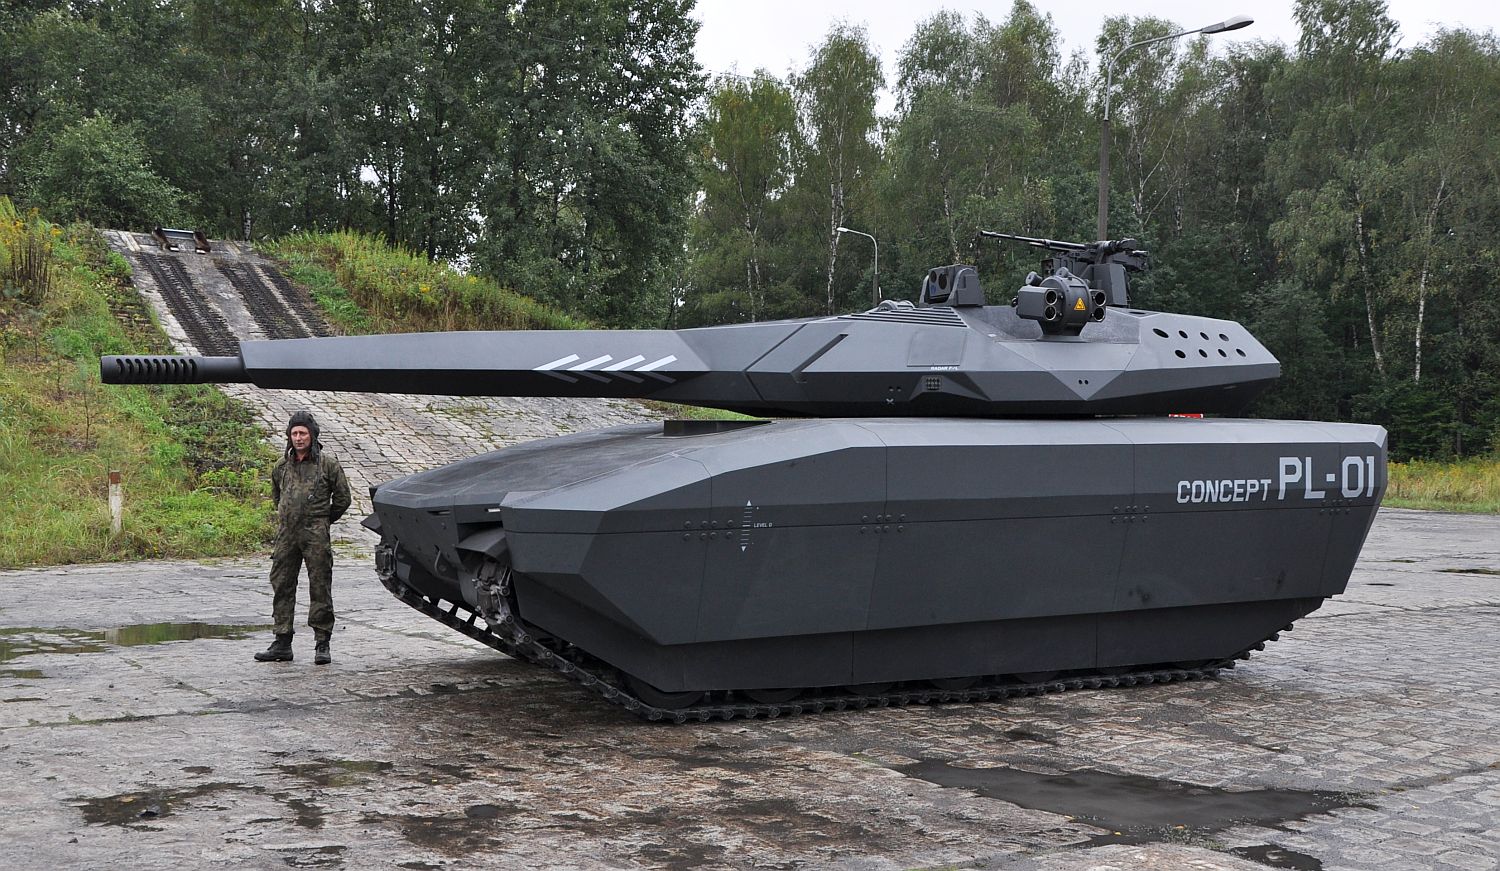 This is a Polish tank concept called PL-01